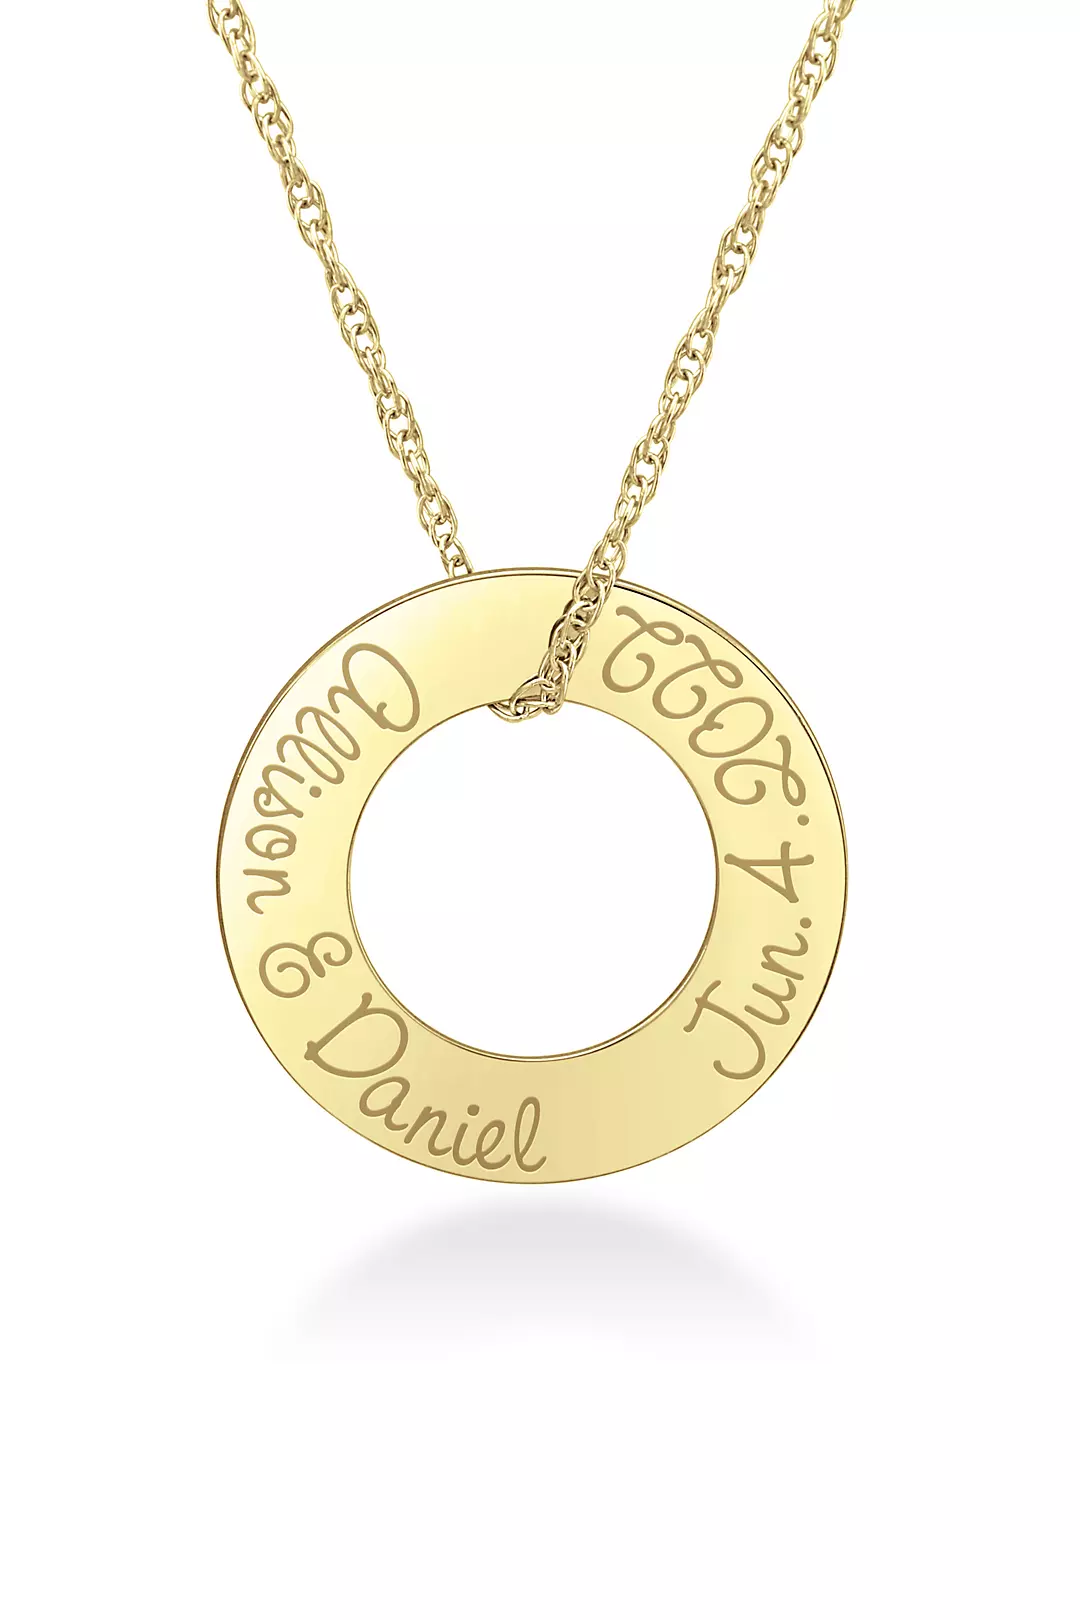 Personalized Ring Necklace with Name and Date Image